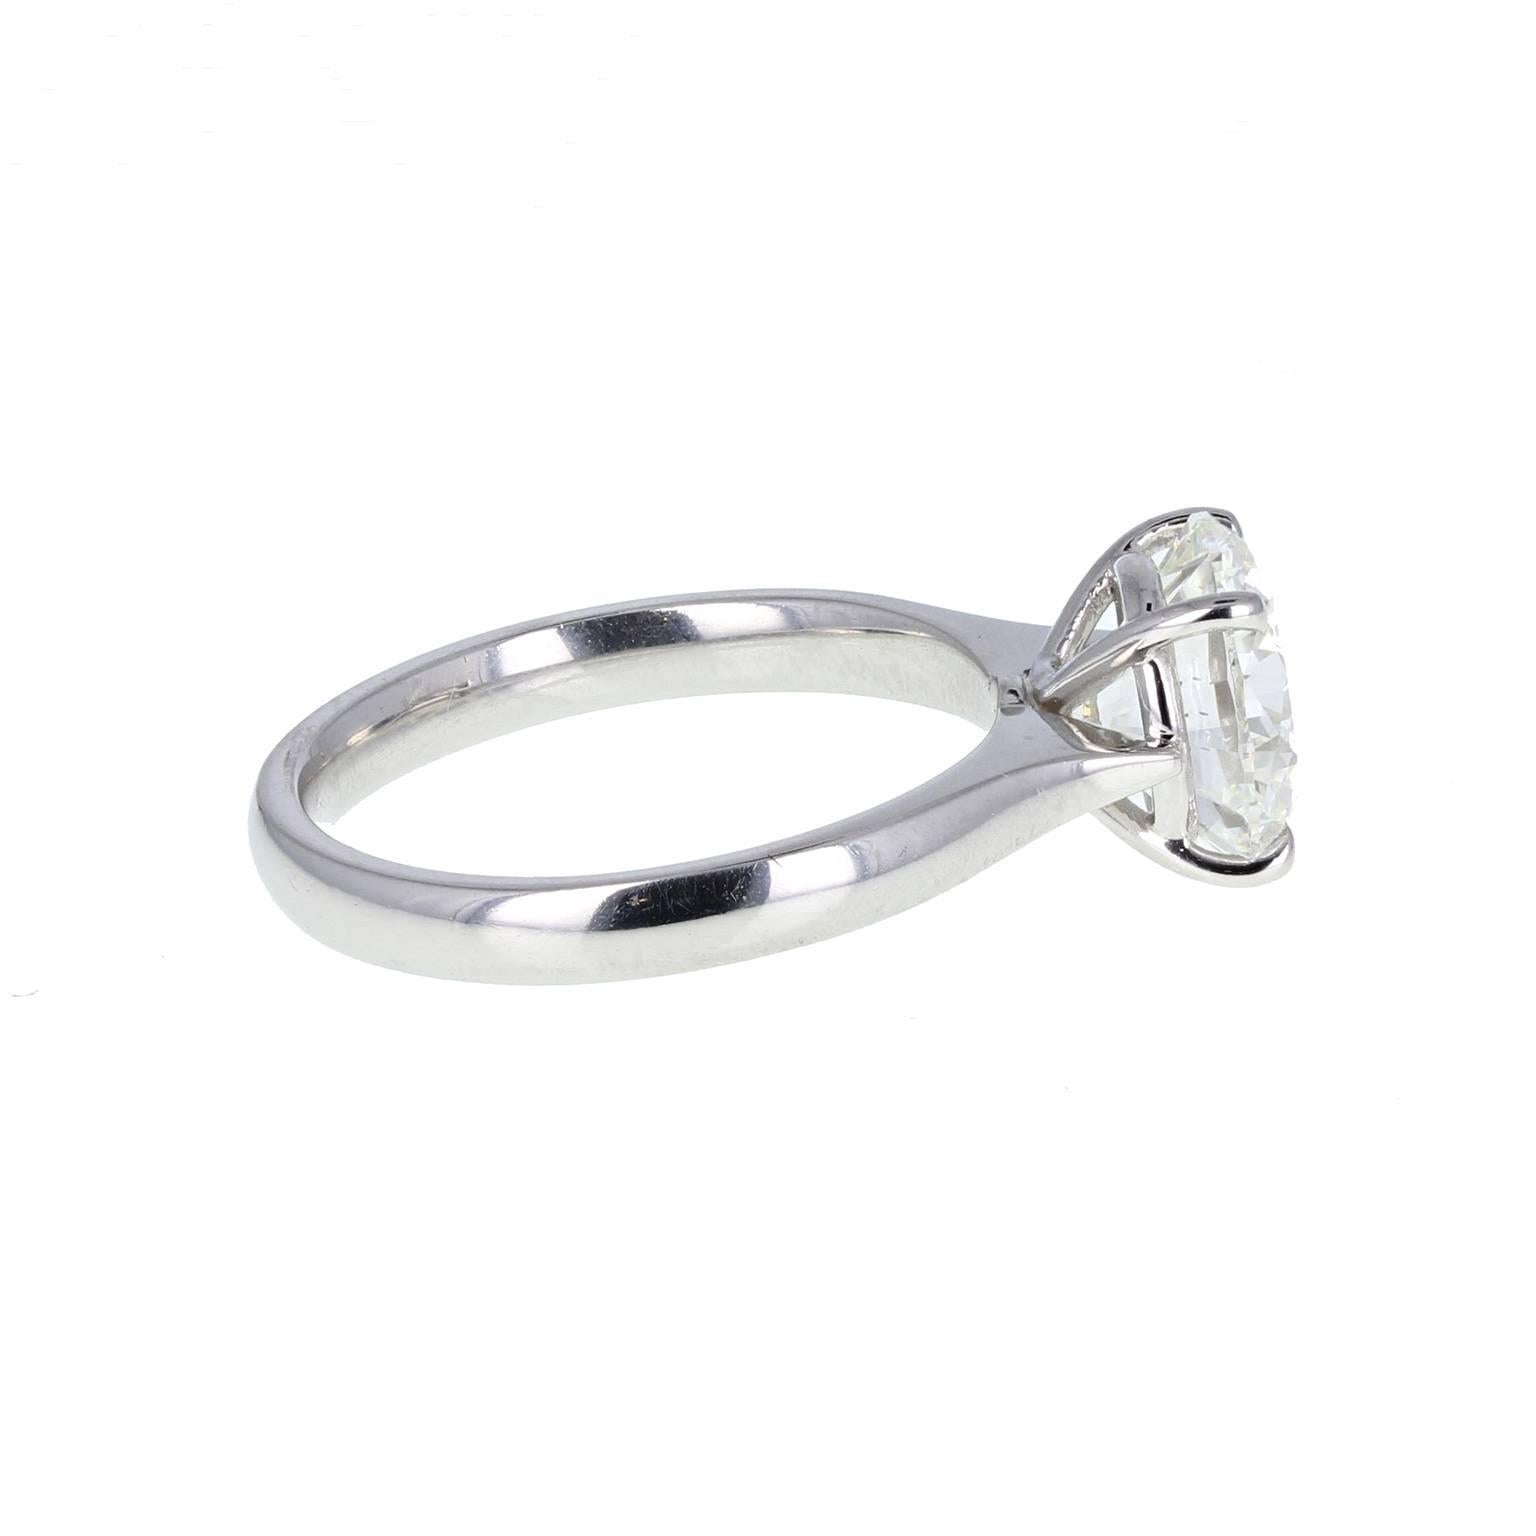 Mounted classically and elegantly in four platinum claws and set to a heavy, quality, polished shank, this diamond is allowed to speak for itself in this fine ring. Very bright, white and lively. An excellent quality diamond ring.
Shank and